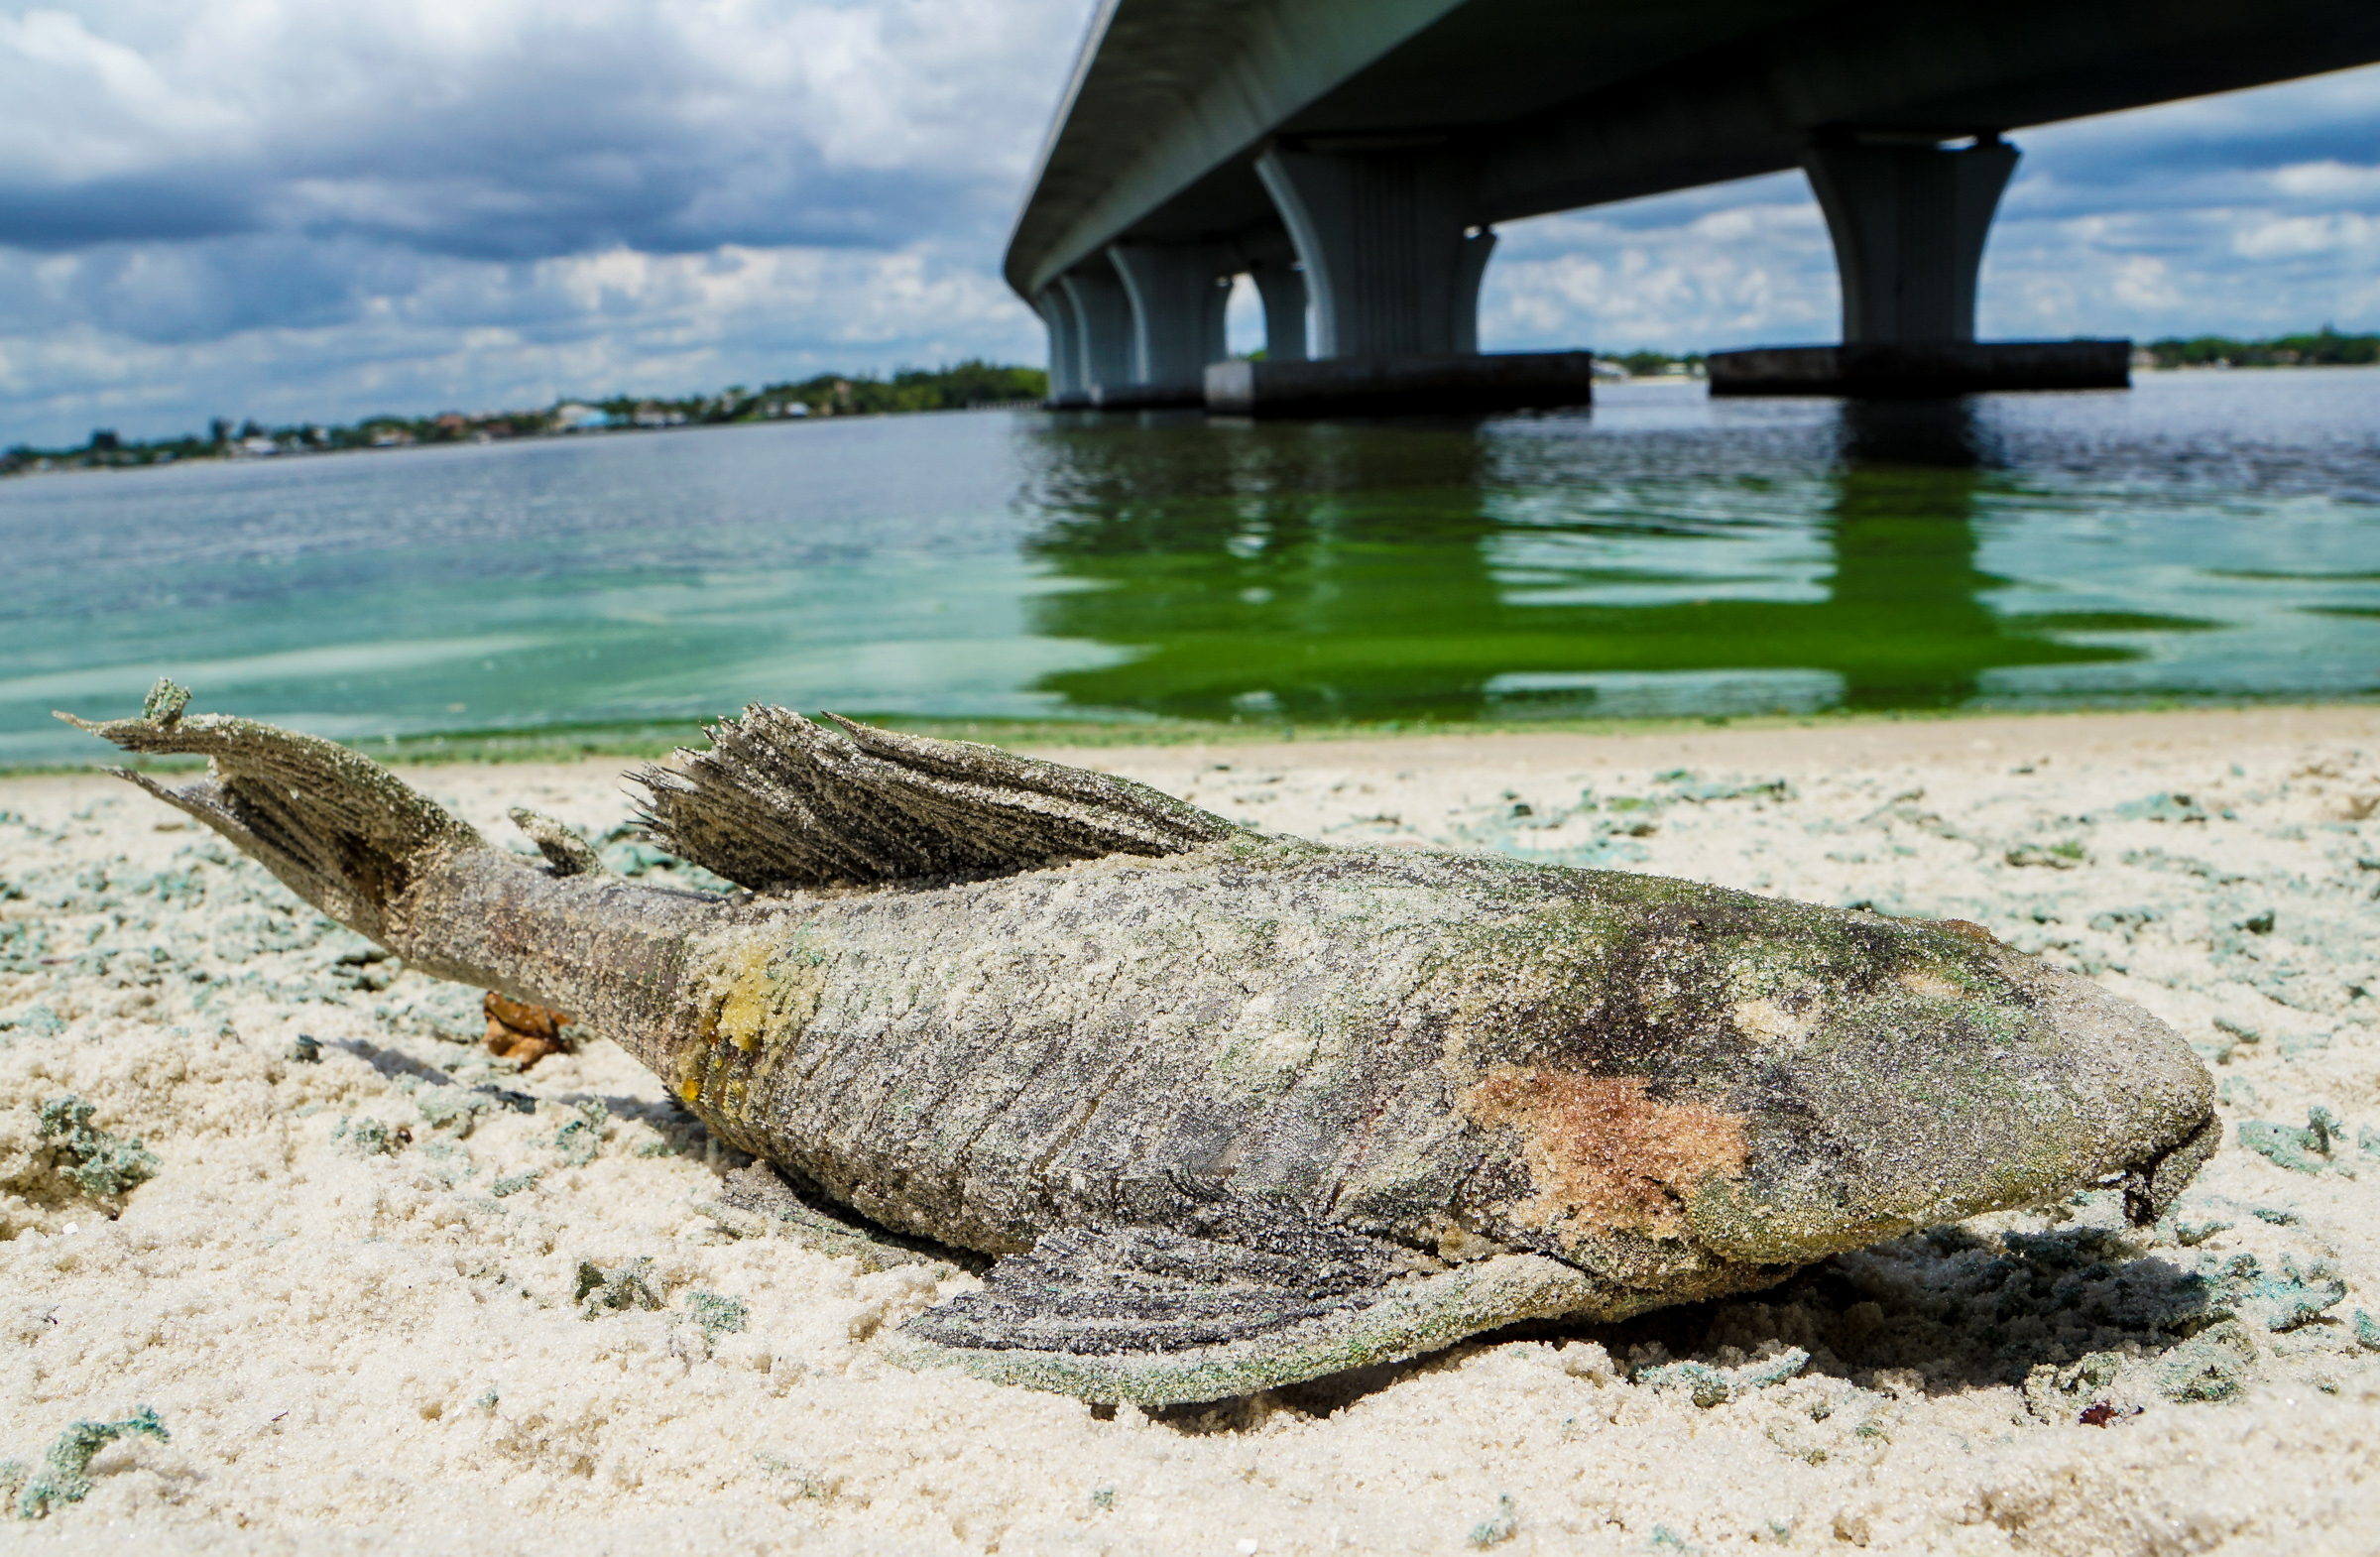 PHOTO: A dead walking catfish lays on the shore with algae along Sewell's Point, Fla. on the St. Lucie River under an Ocean Boulevard bridge on June 27, 2016.